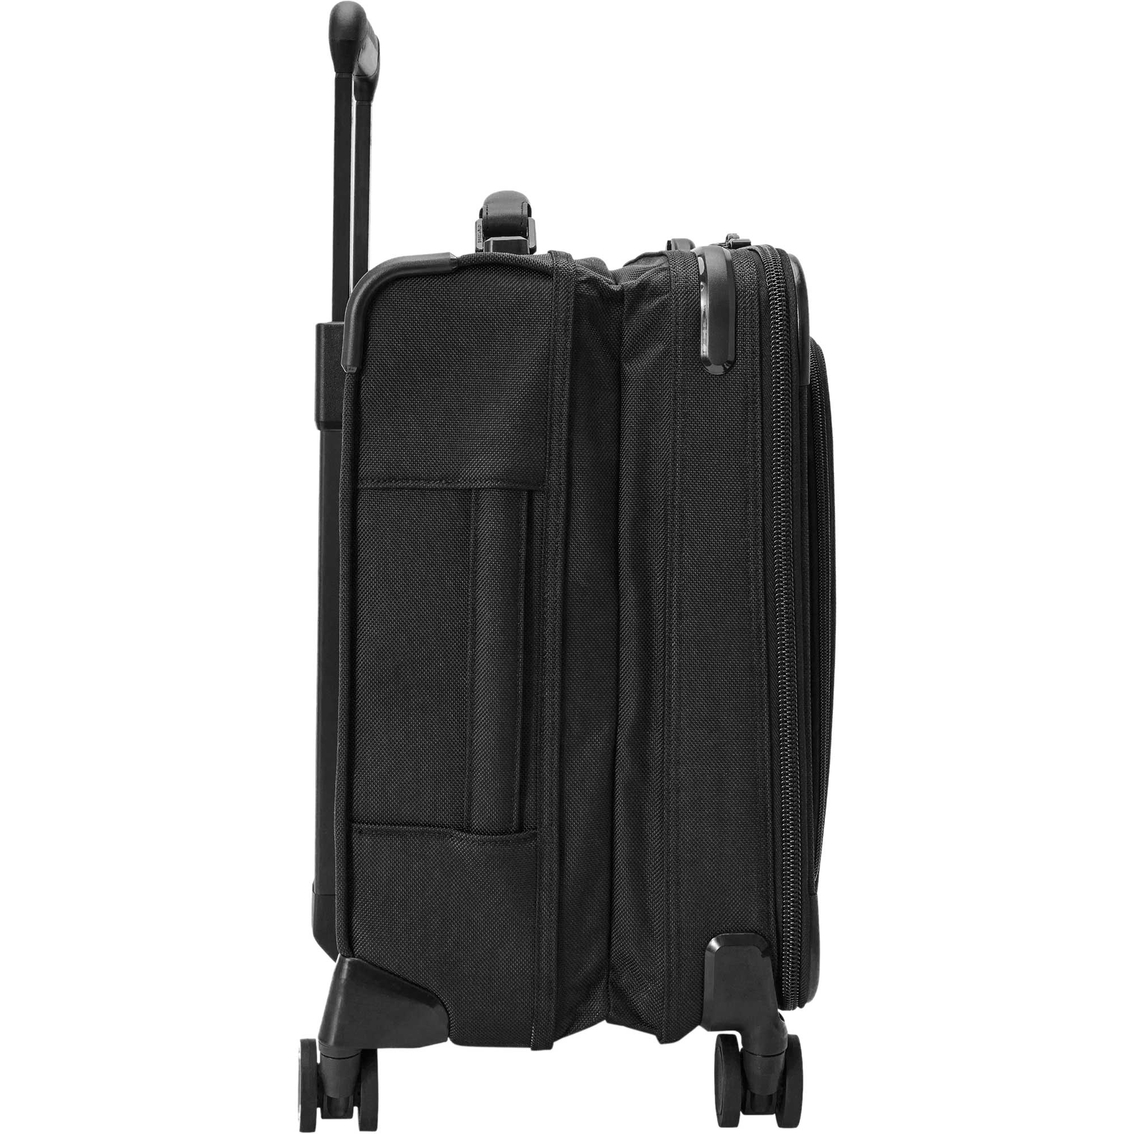 Briggs & Riley Baseline Compact Carry On Spinner, Black - Image 5 of 9